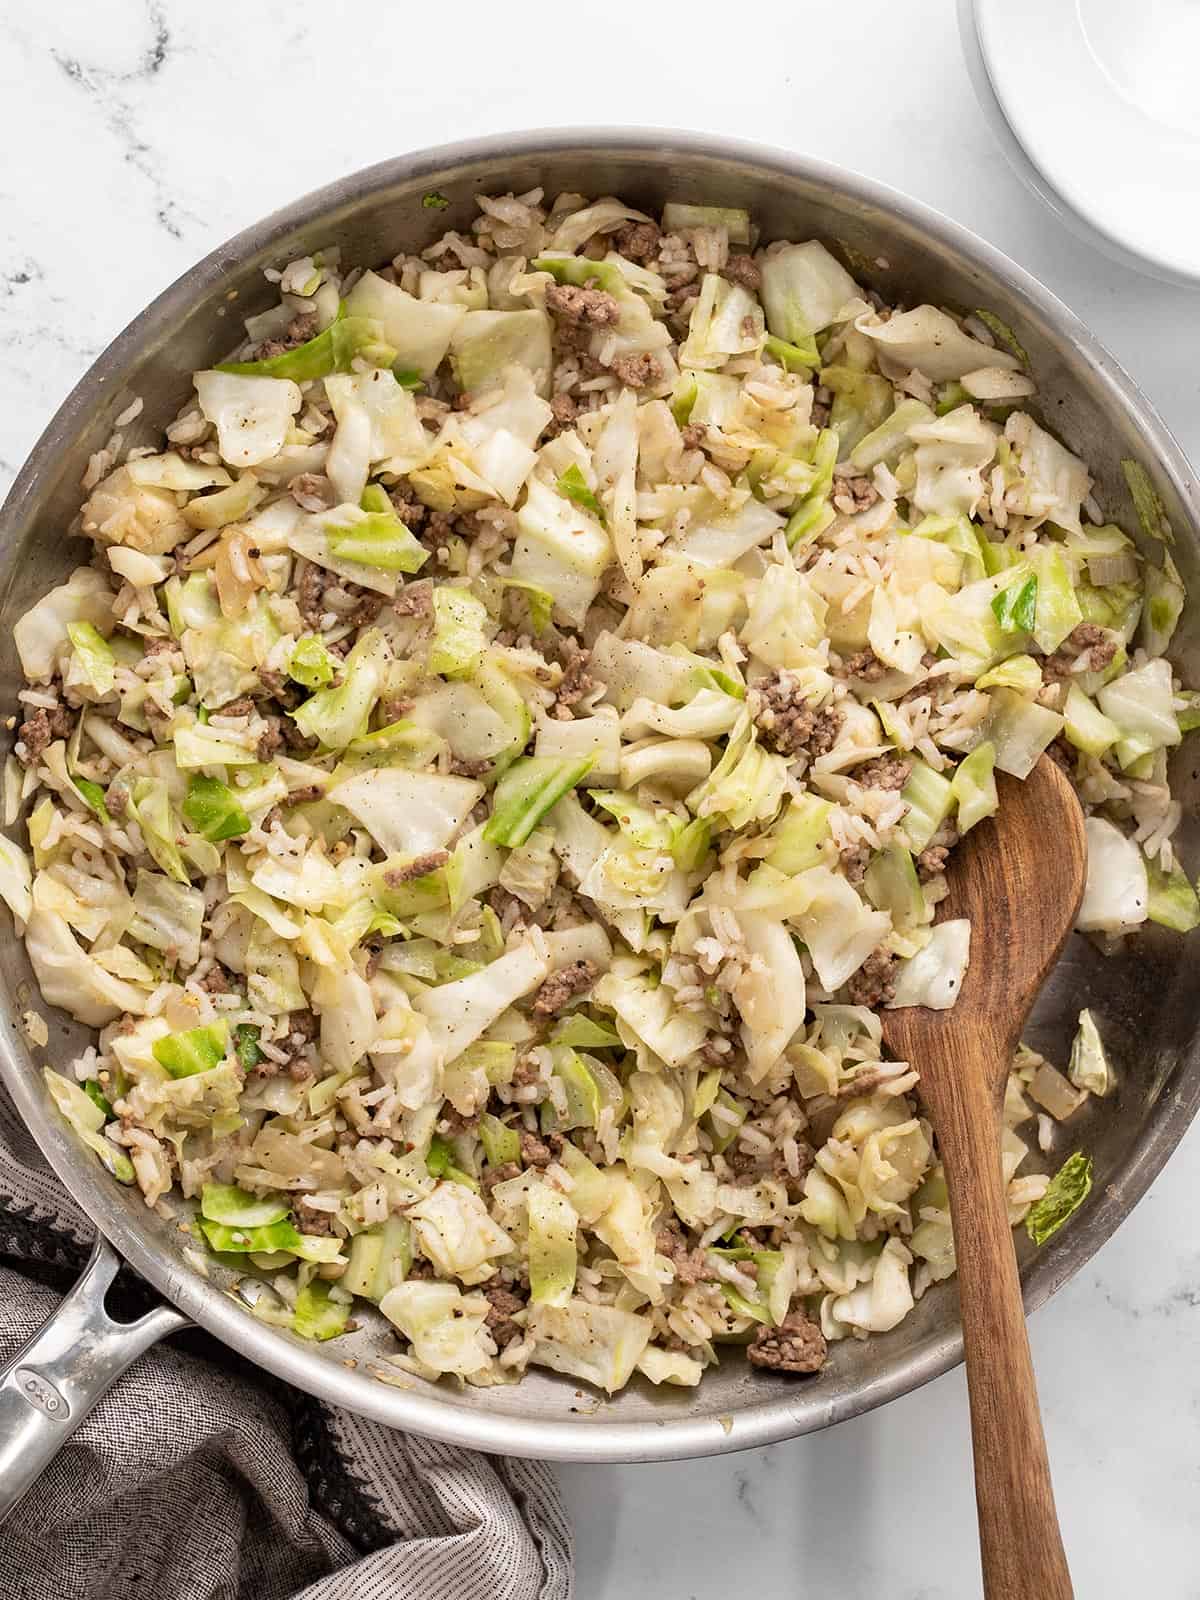 Overhead view of a skillet full of sautéed beef cabbage and rice with a wooden spoon.